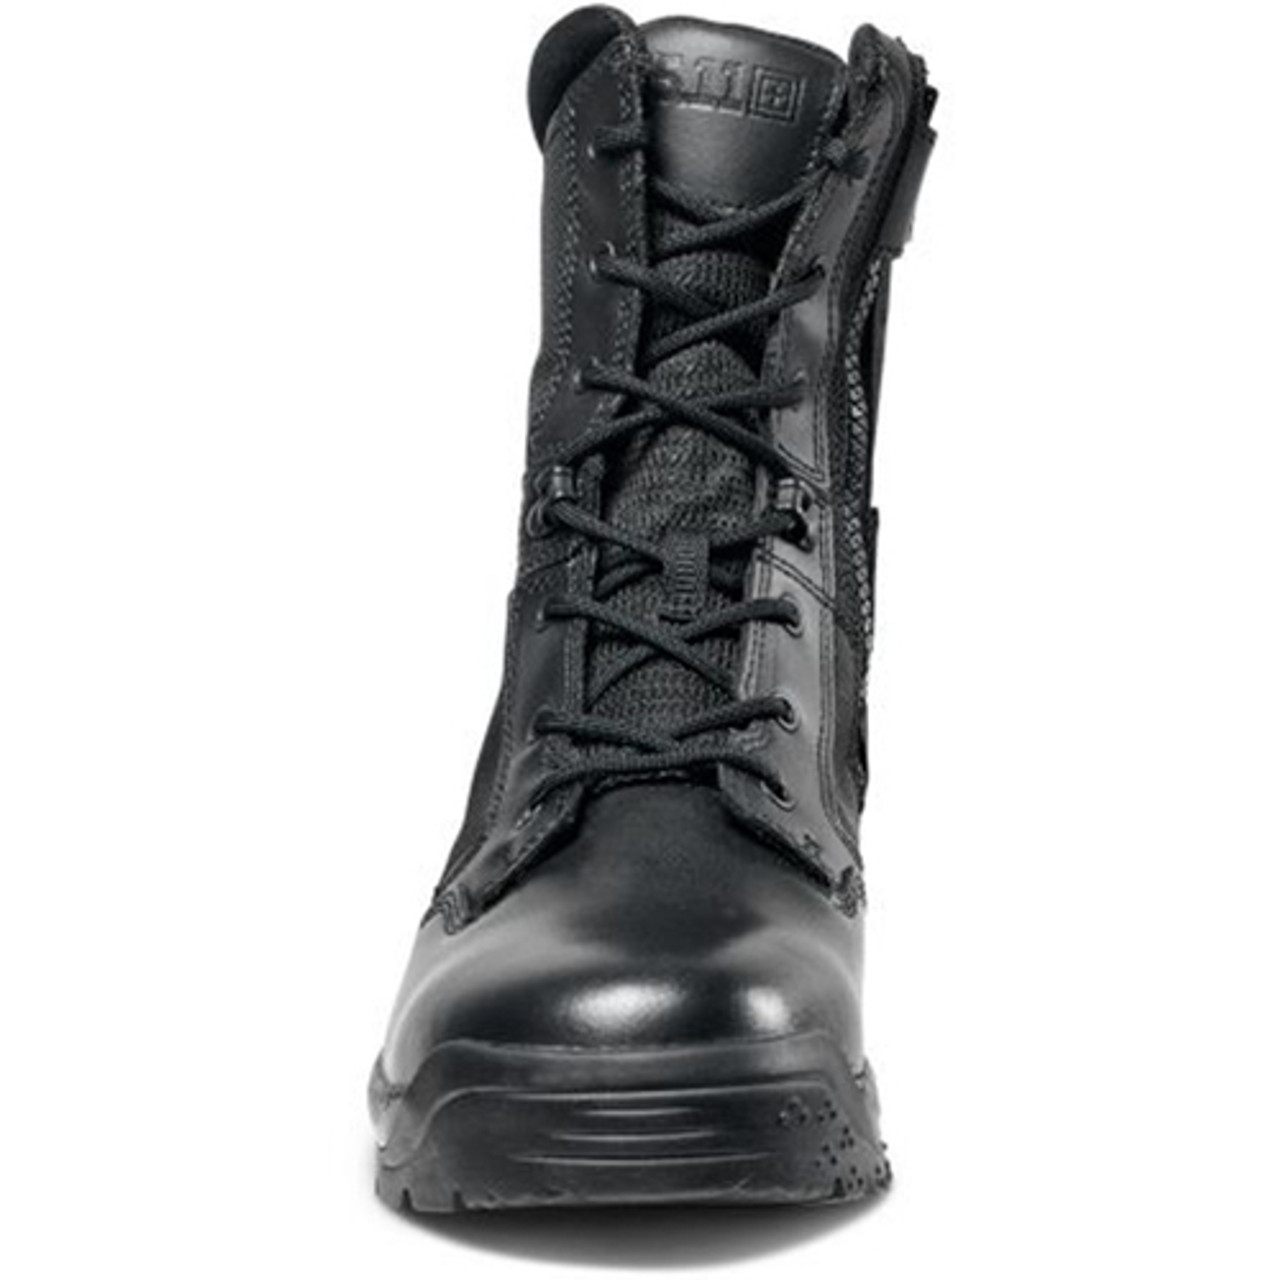 tactical boots with knife pocket